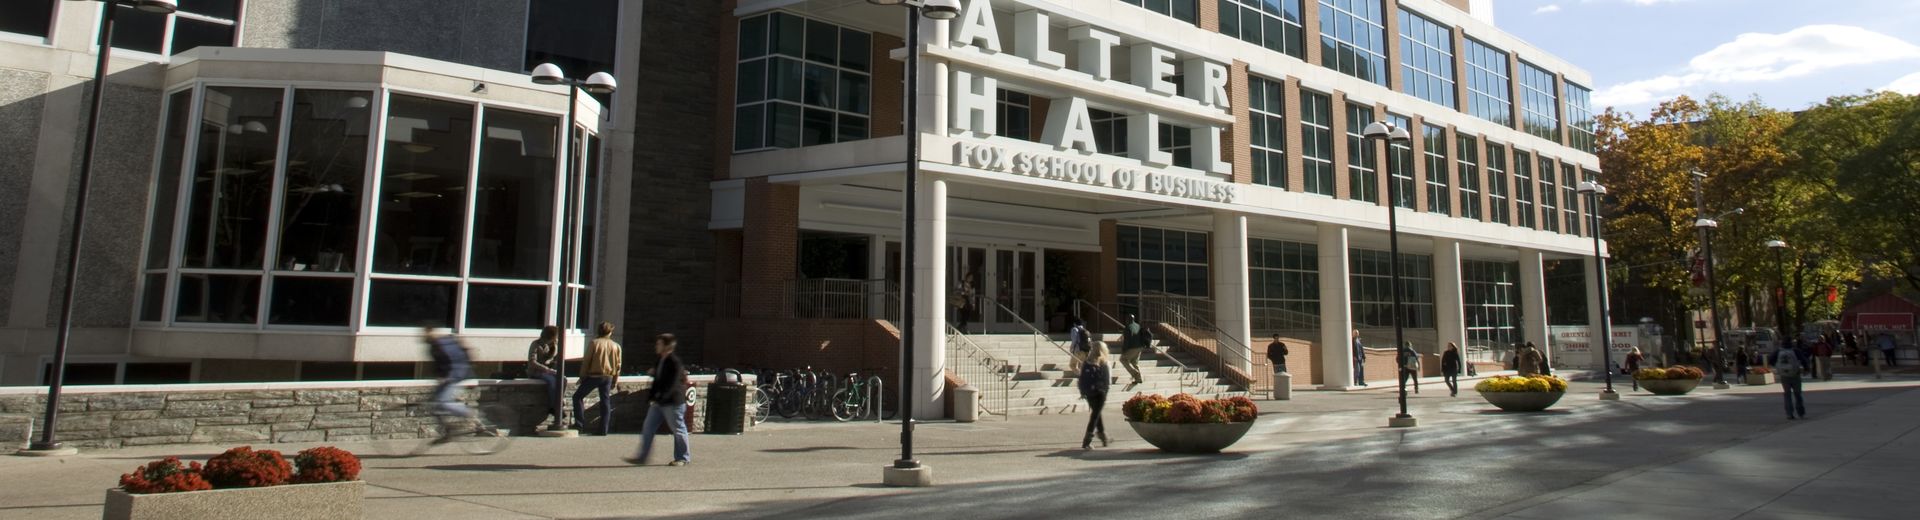 Alter Hall, home of Temple University's Fox School of Business